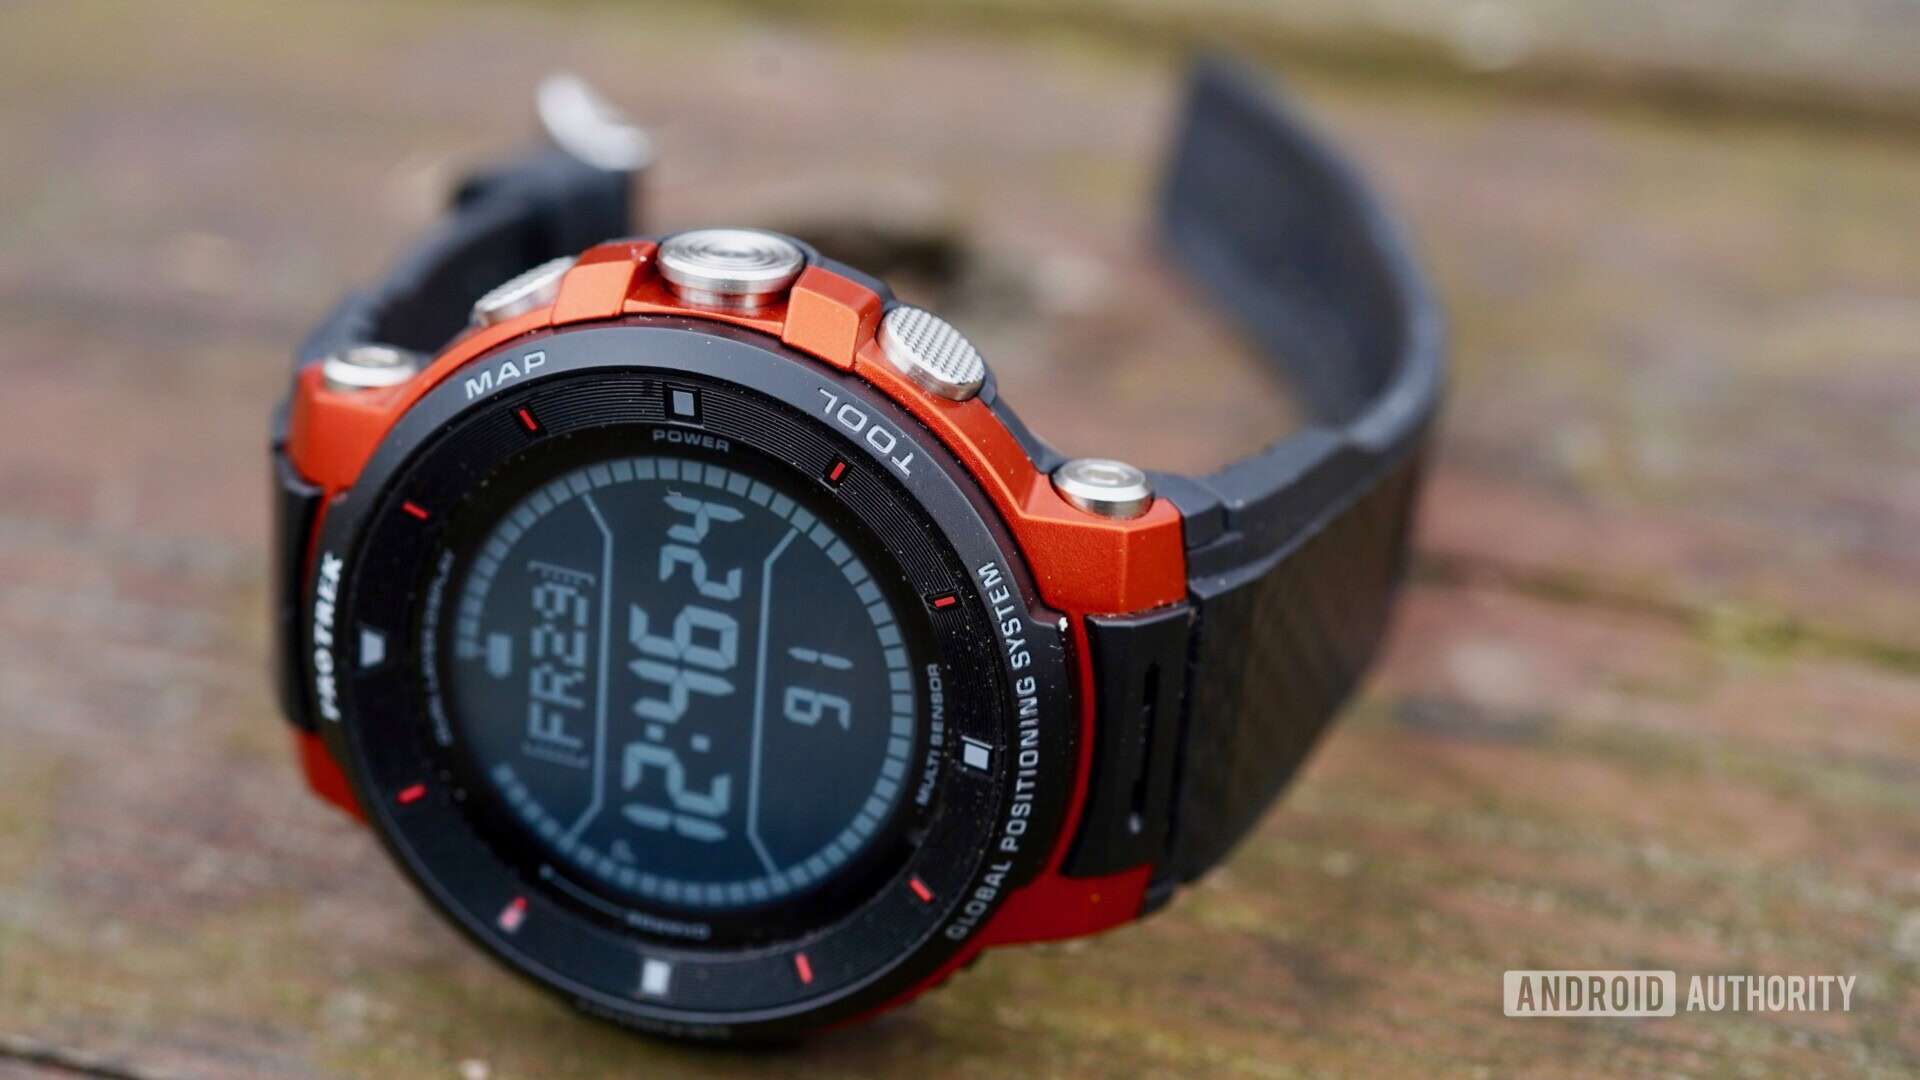 Casio Trek WSD-F30 review: Tracking all your adventures